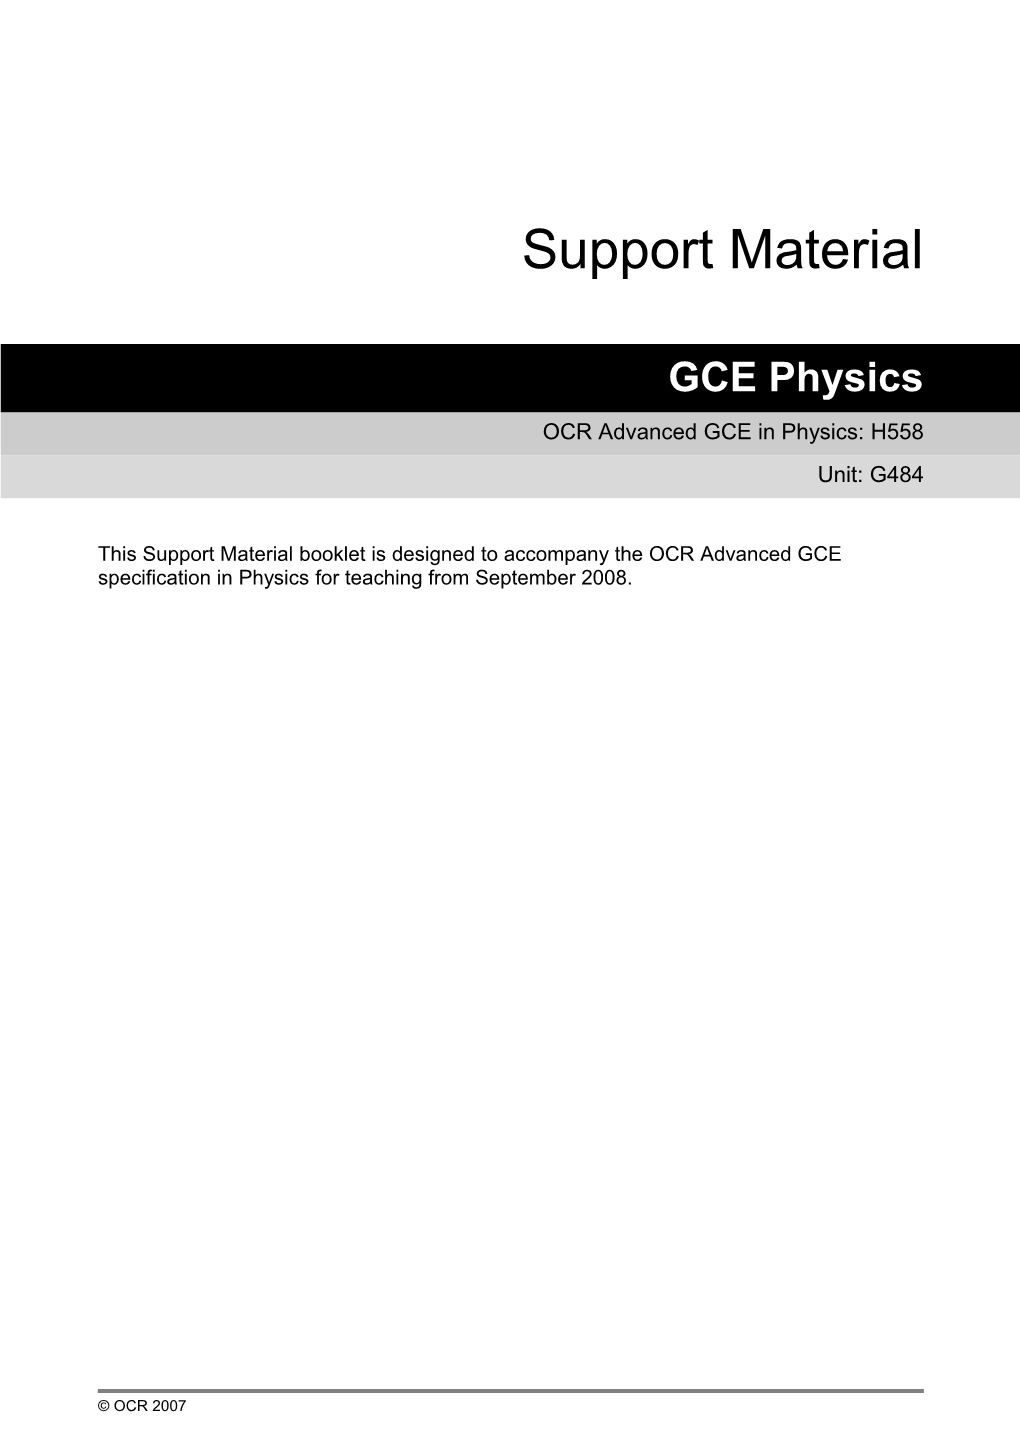 OCR Advanced GCE in Physics: H558